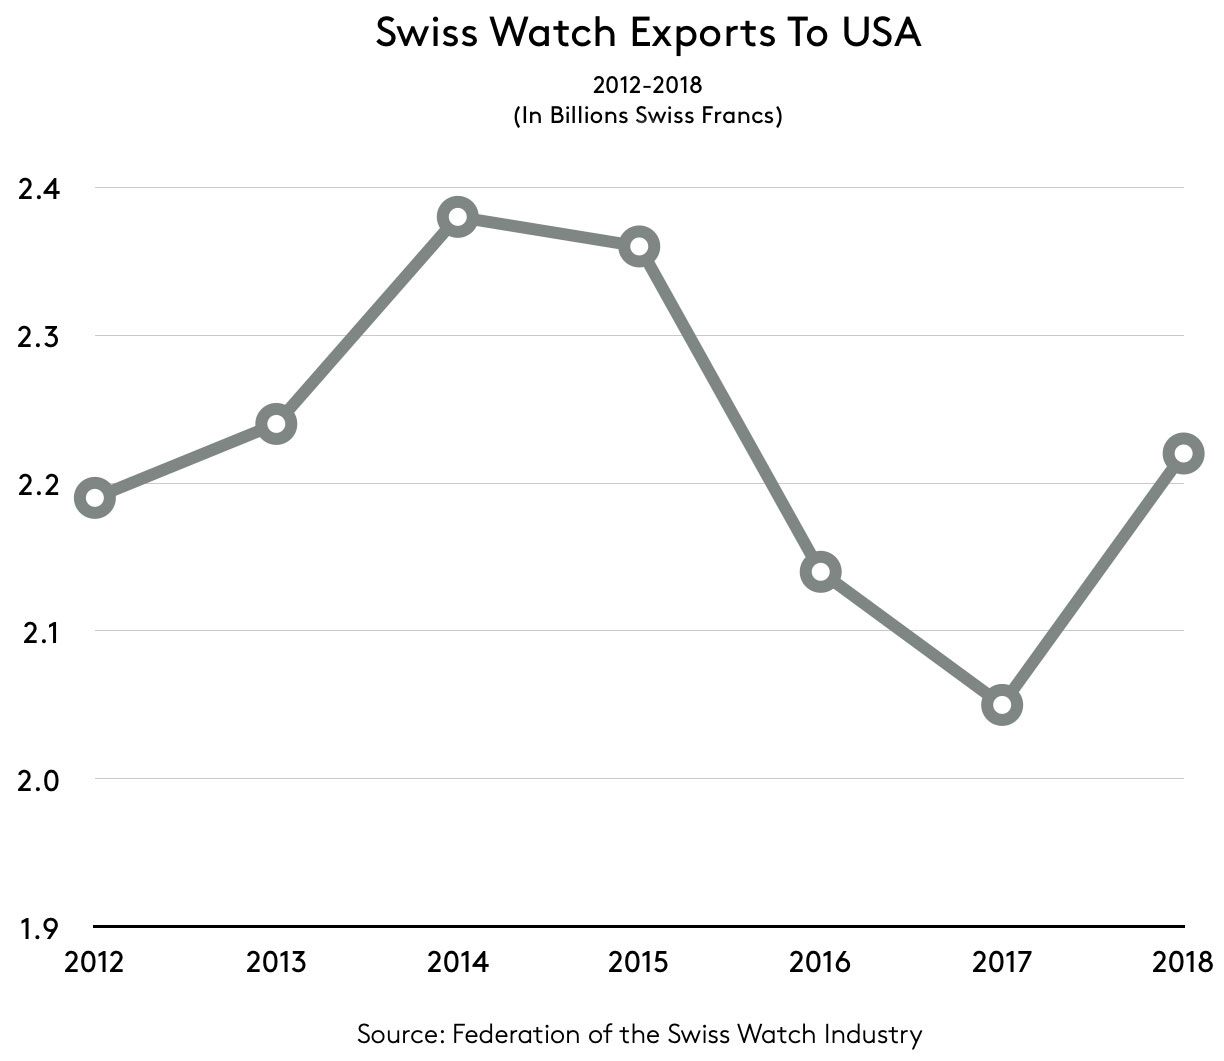  swiss watch export to USA 2012 to 2018